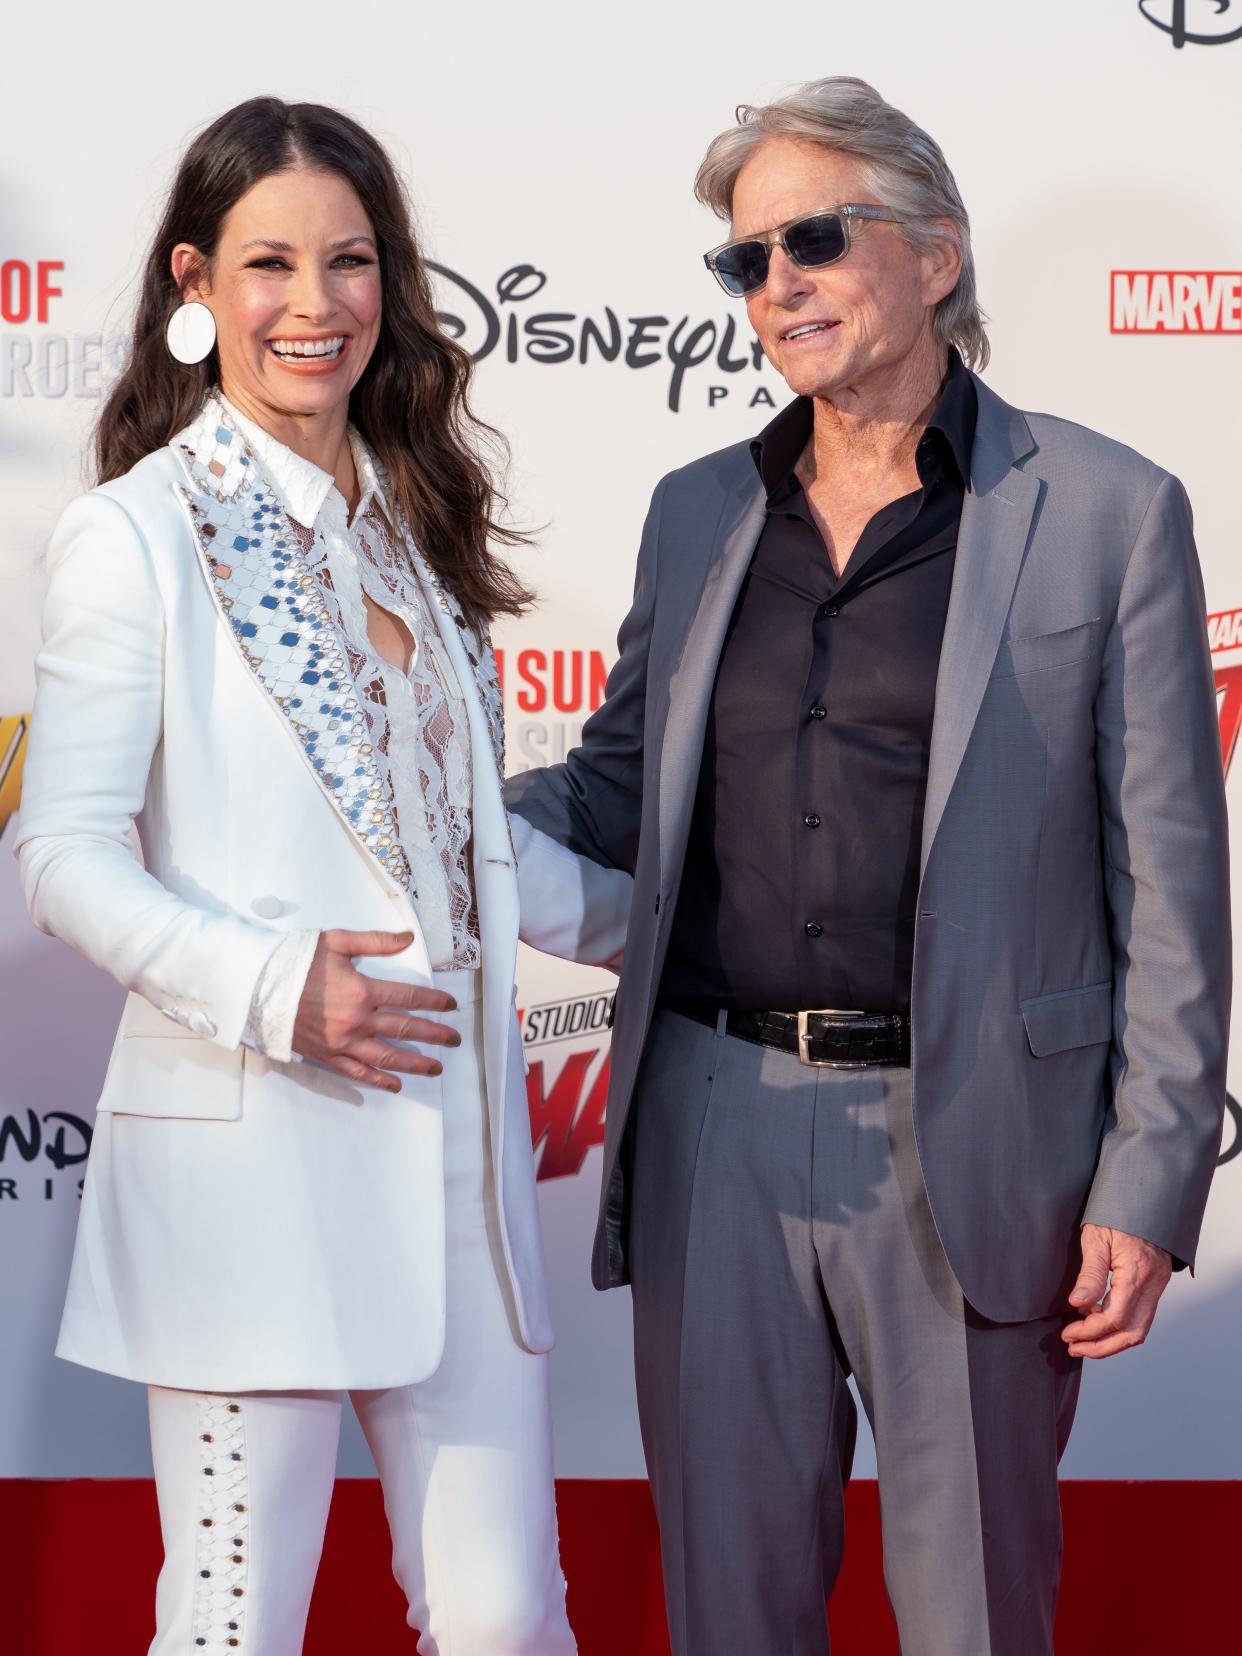 Evangeline Lilly and Michael Douglas Ant-Man premiere